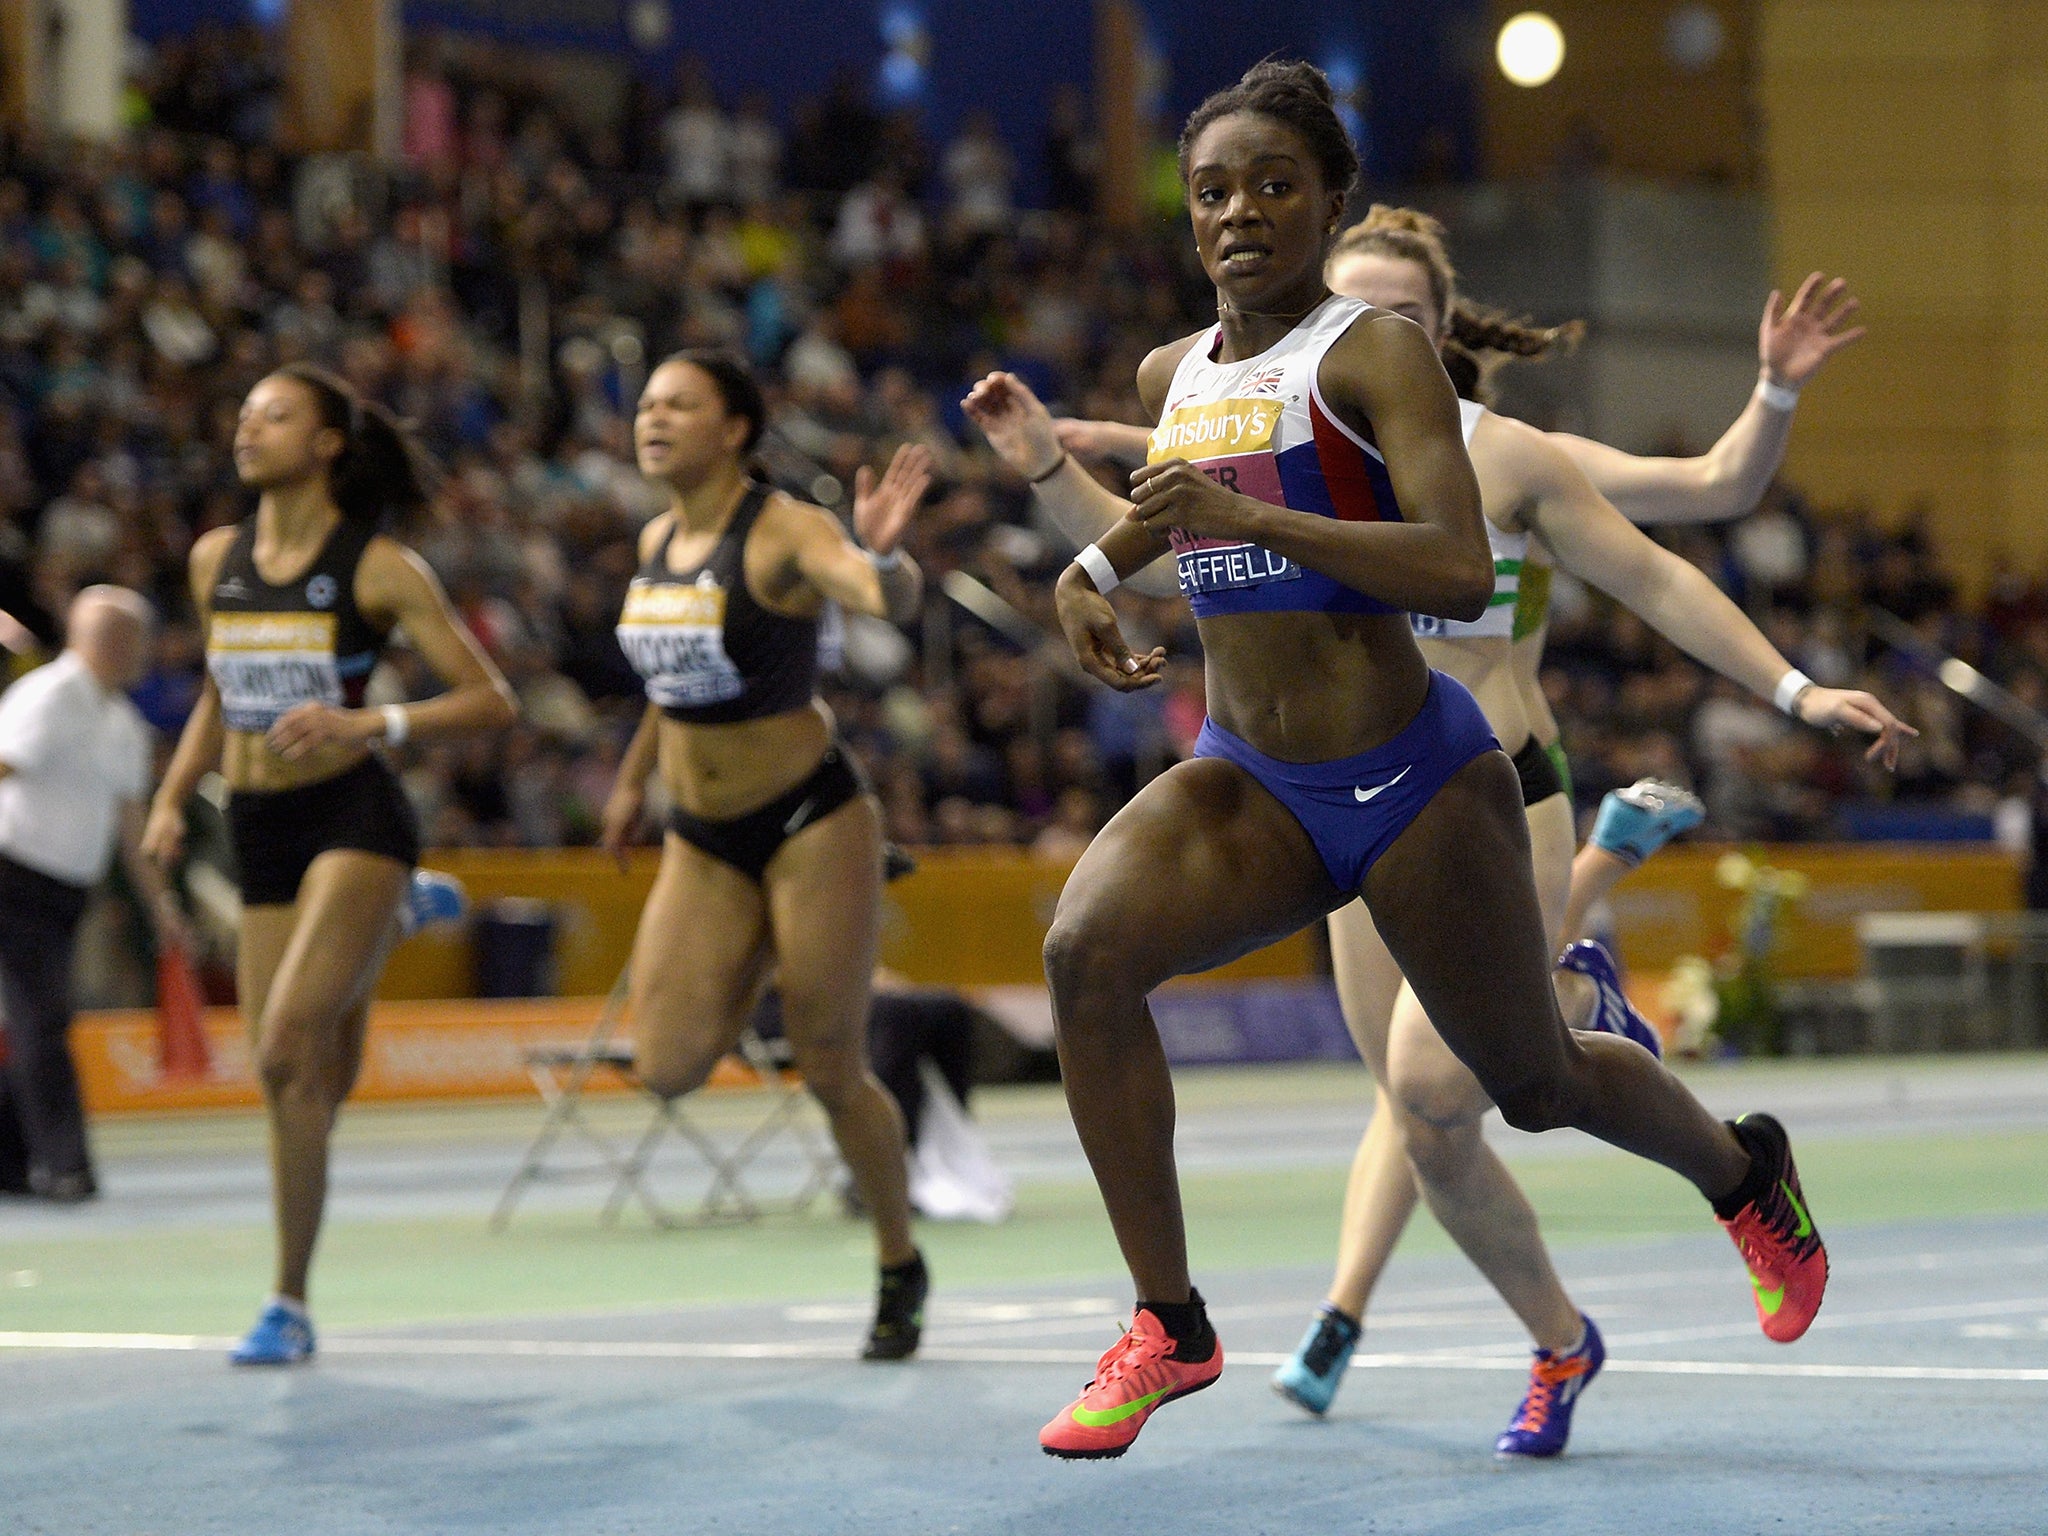 Dina Asher-Smith crosses the line to the womens 60 metres final during the Sainsbury's British Athletics Indoor Championships